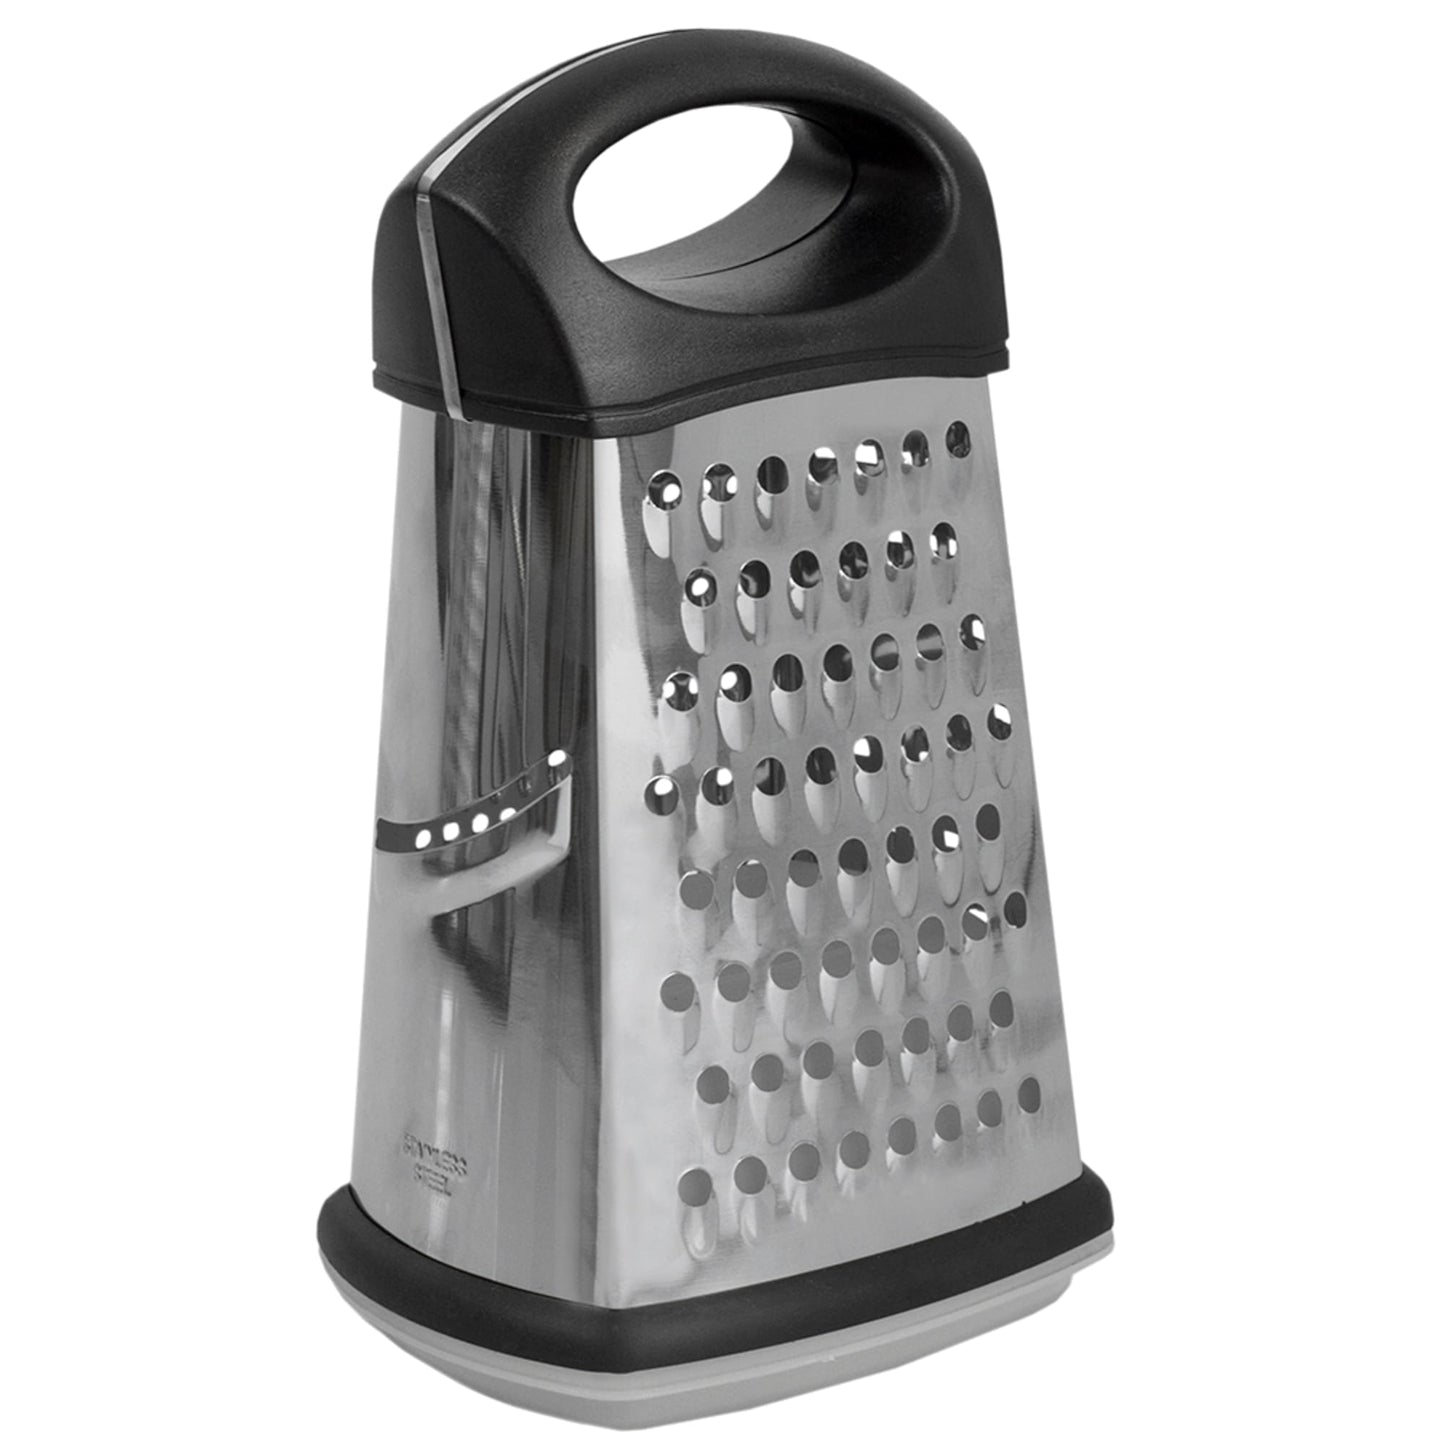 4 Sided Stainless Steel Cheese Grater with Storage Container